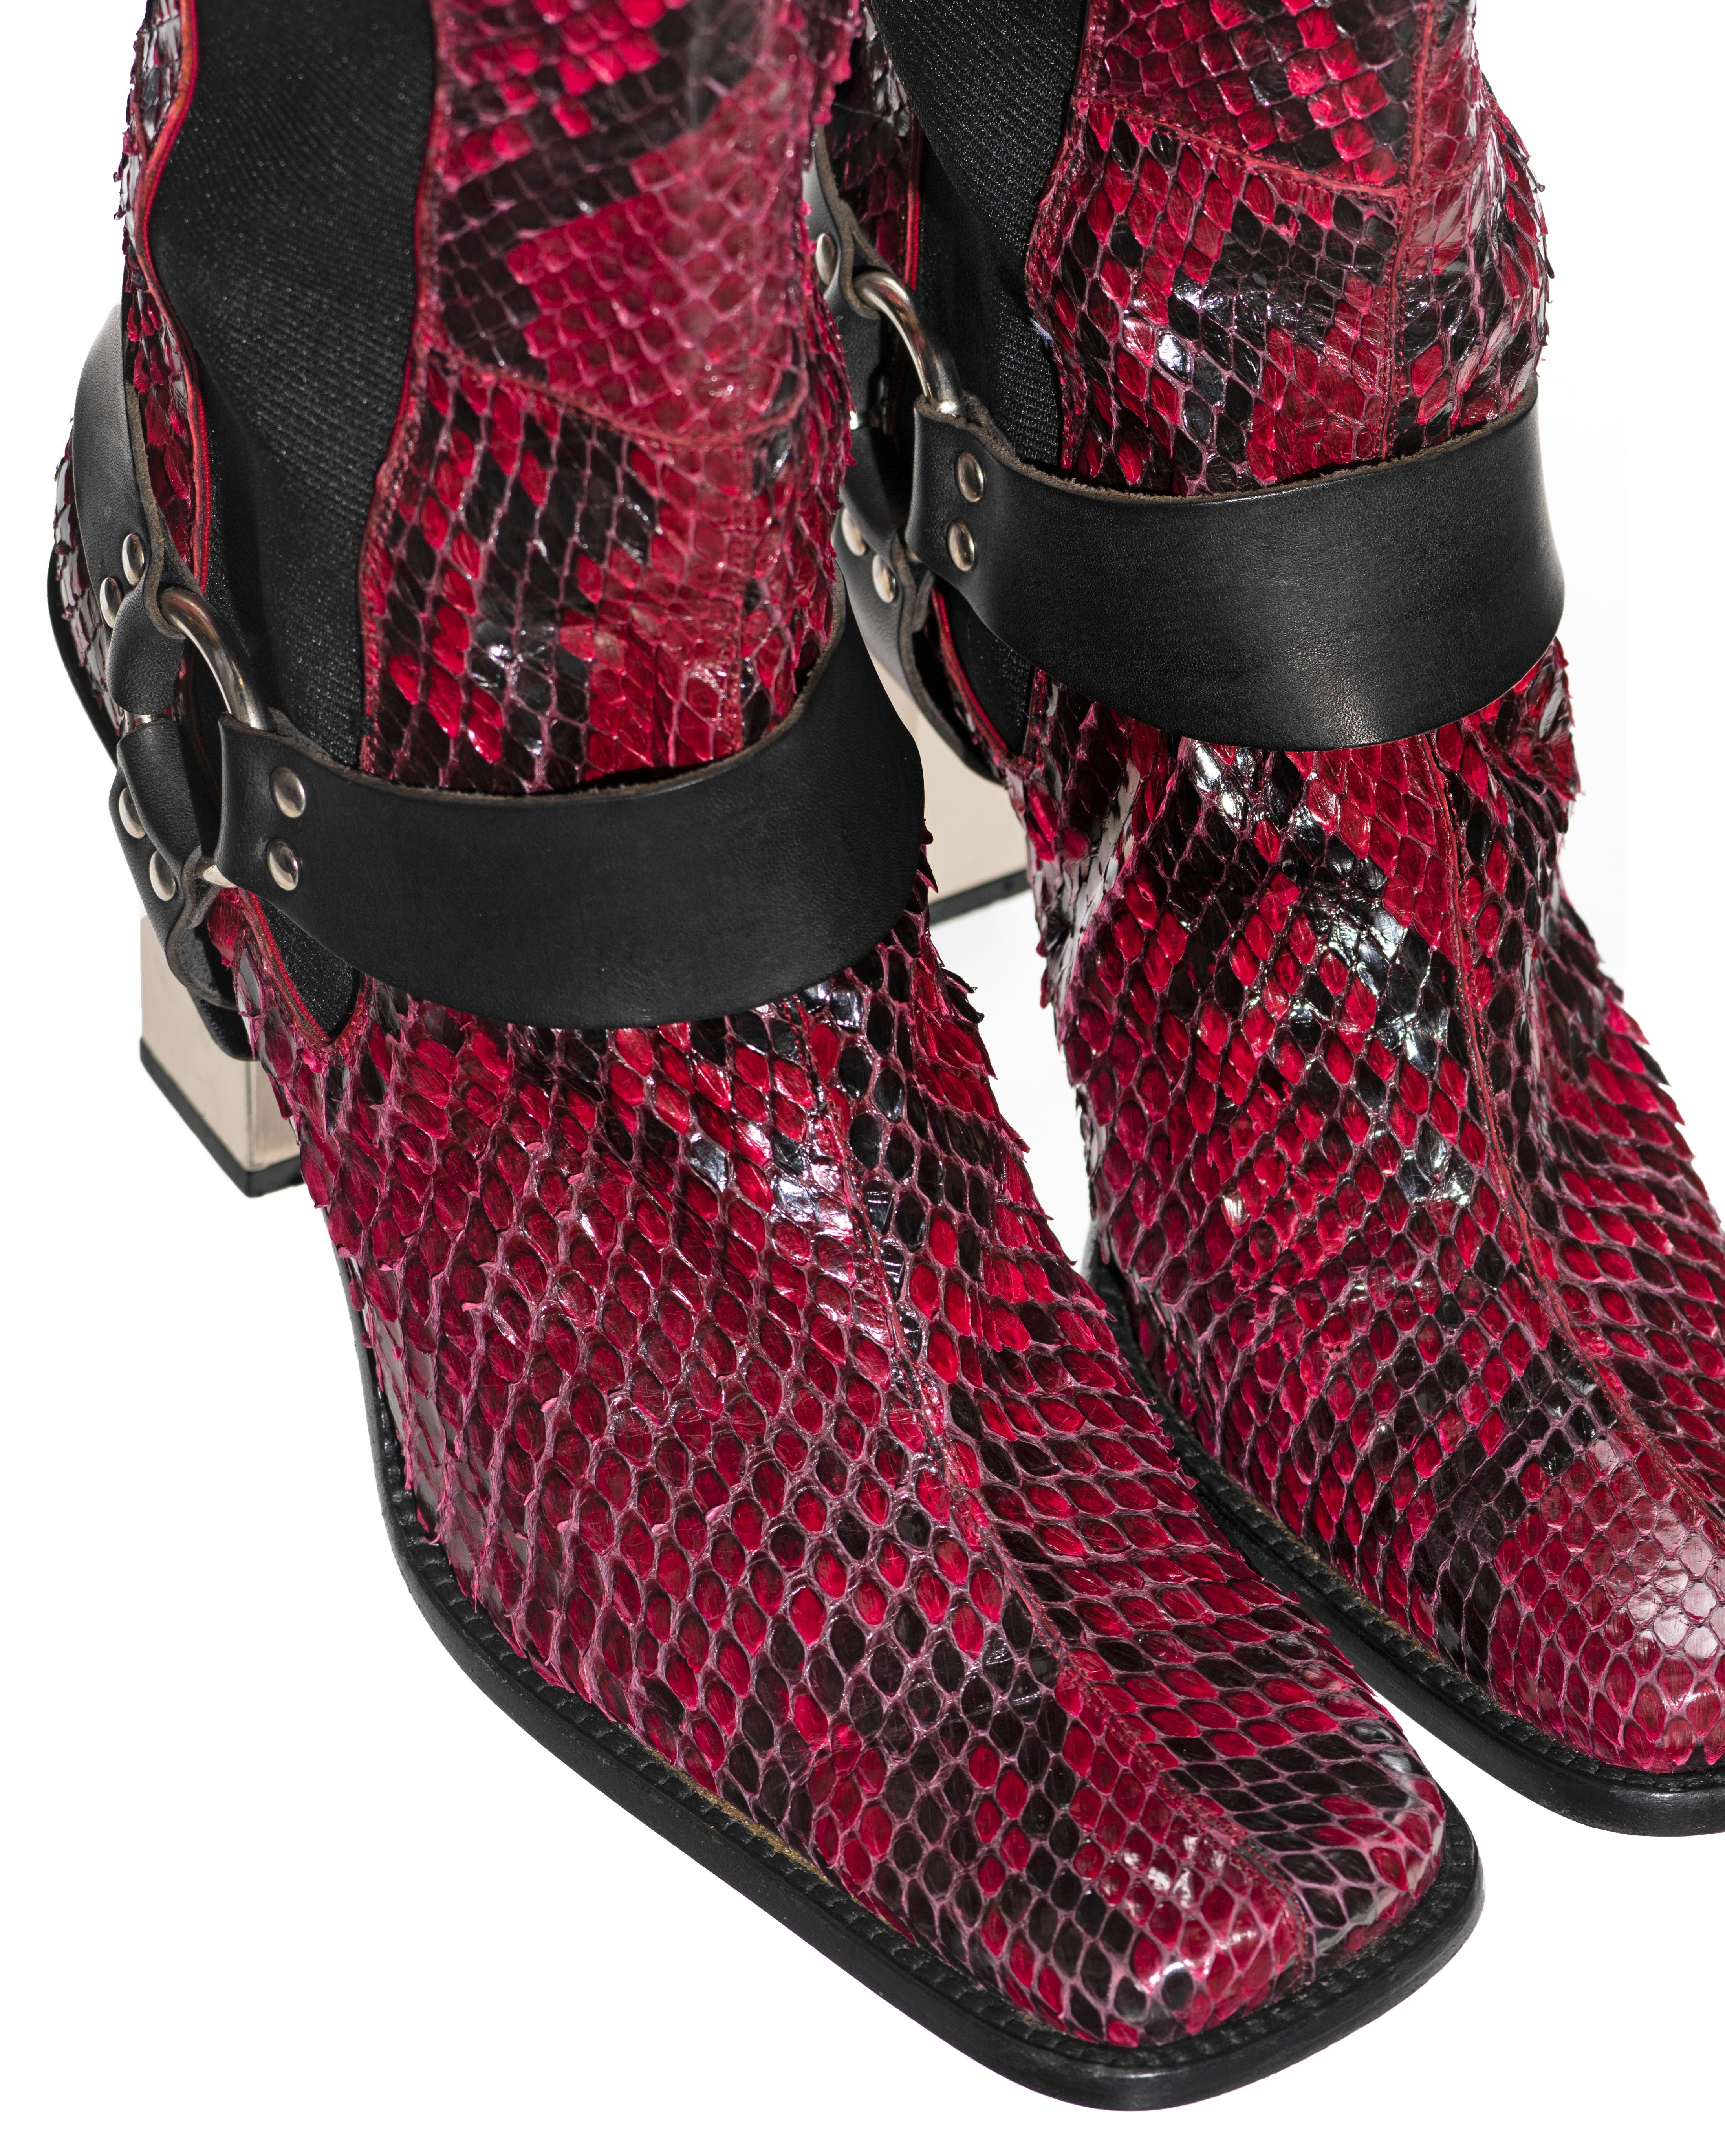 Dolce & Gabbana raspberry python boots with mirrored heels, fw 1999 For Sale 1